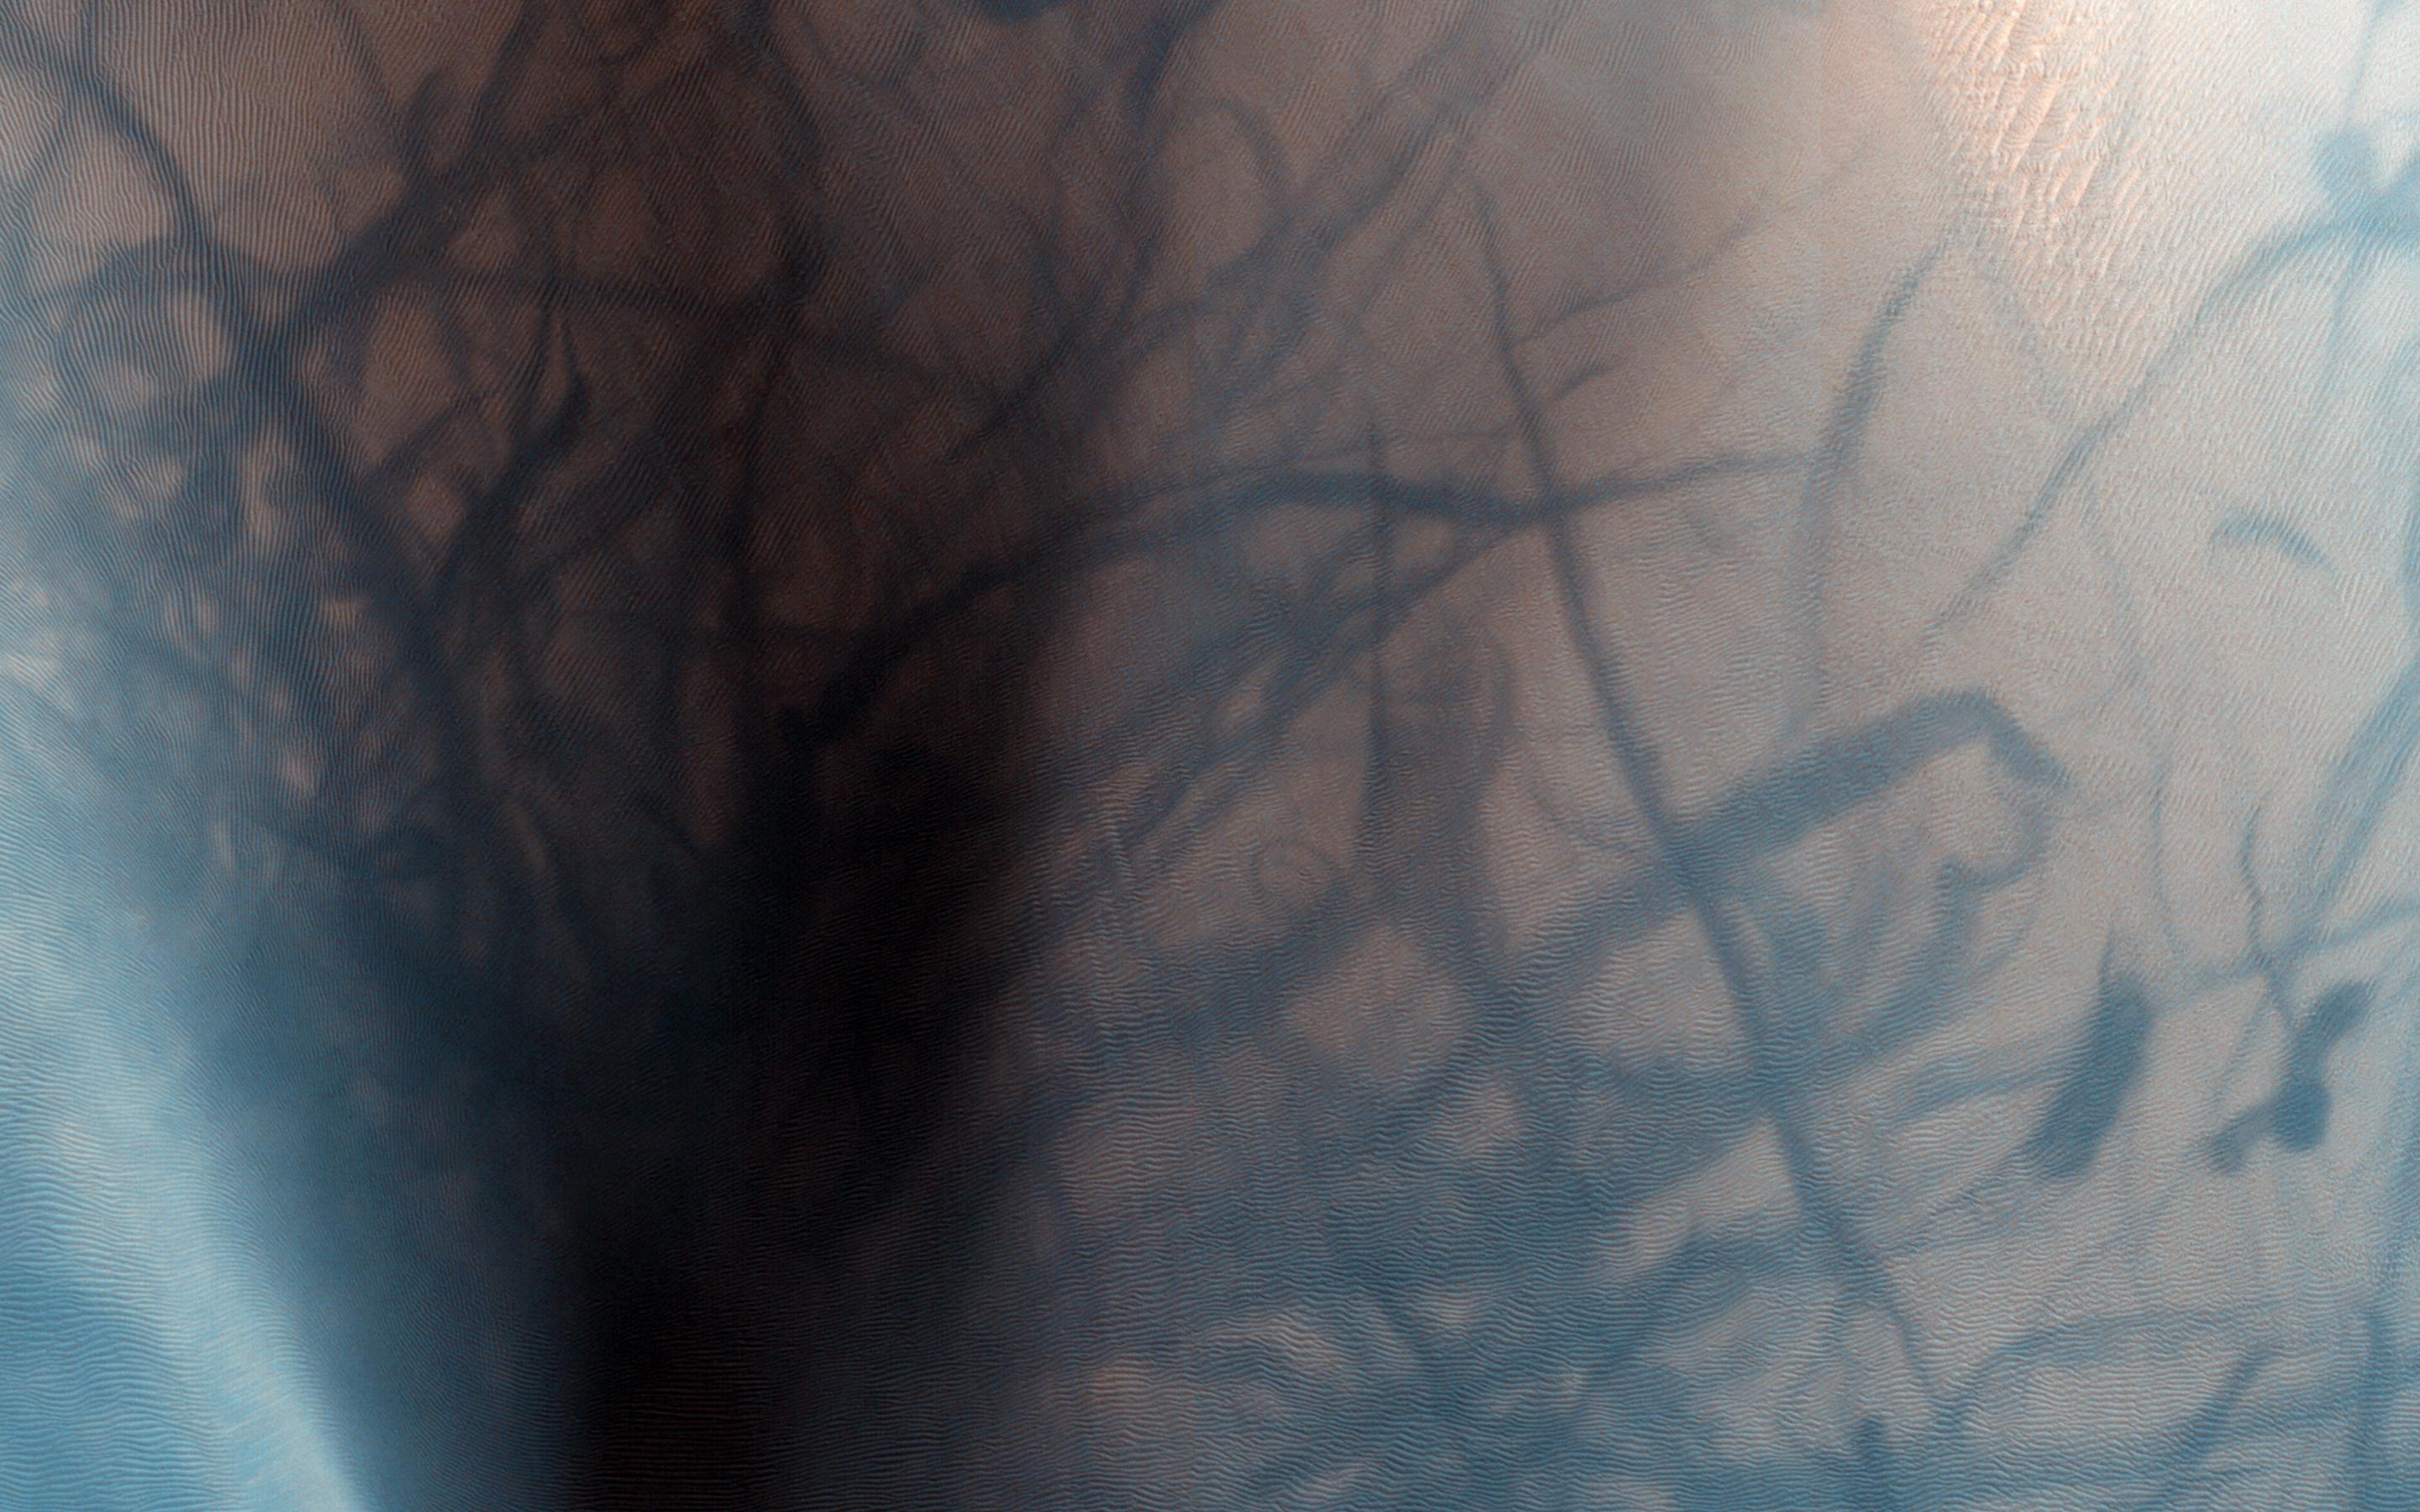 This observation from NASA's Mars Reconnaissance Orbiter shows a sand dune field in the Nili Fossae region of Mars. The dark lines swirling over the surface of the dunes are the tracks of dust devils.